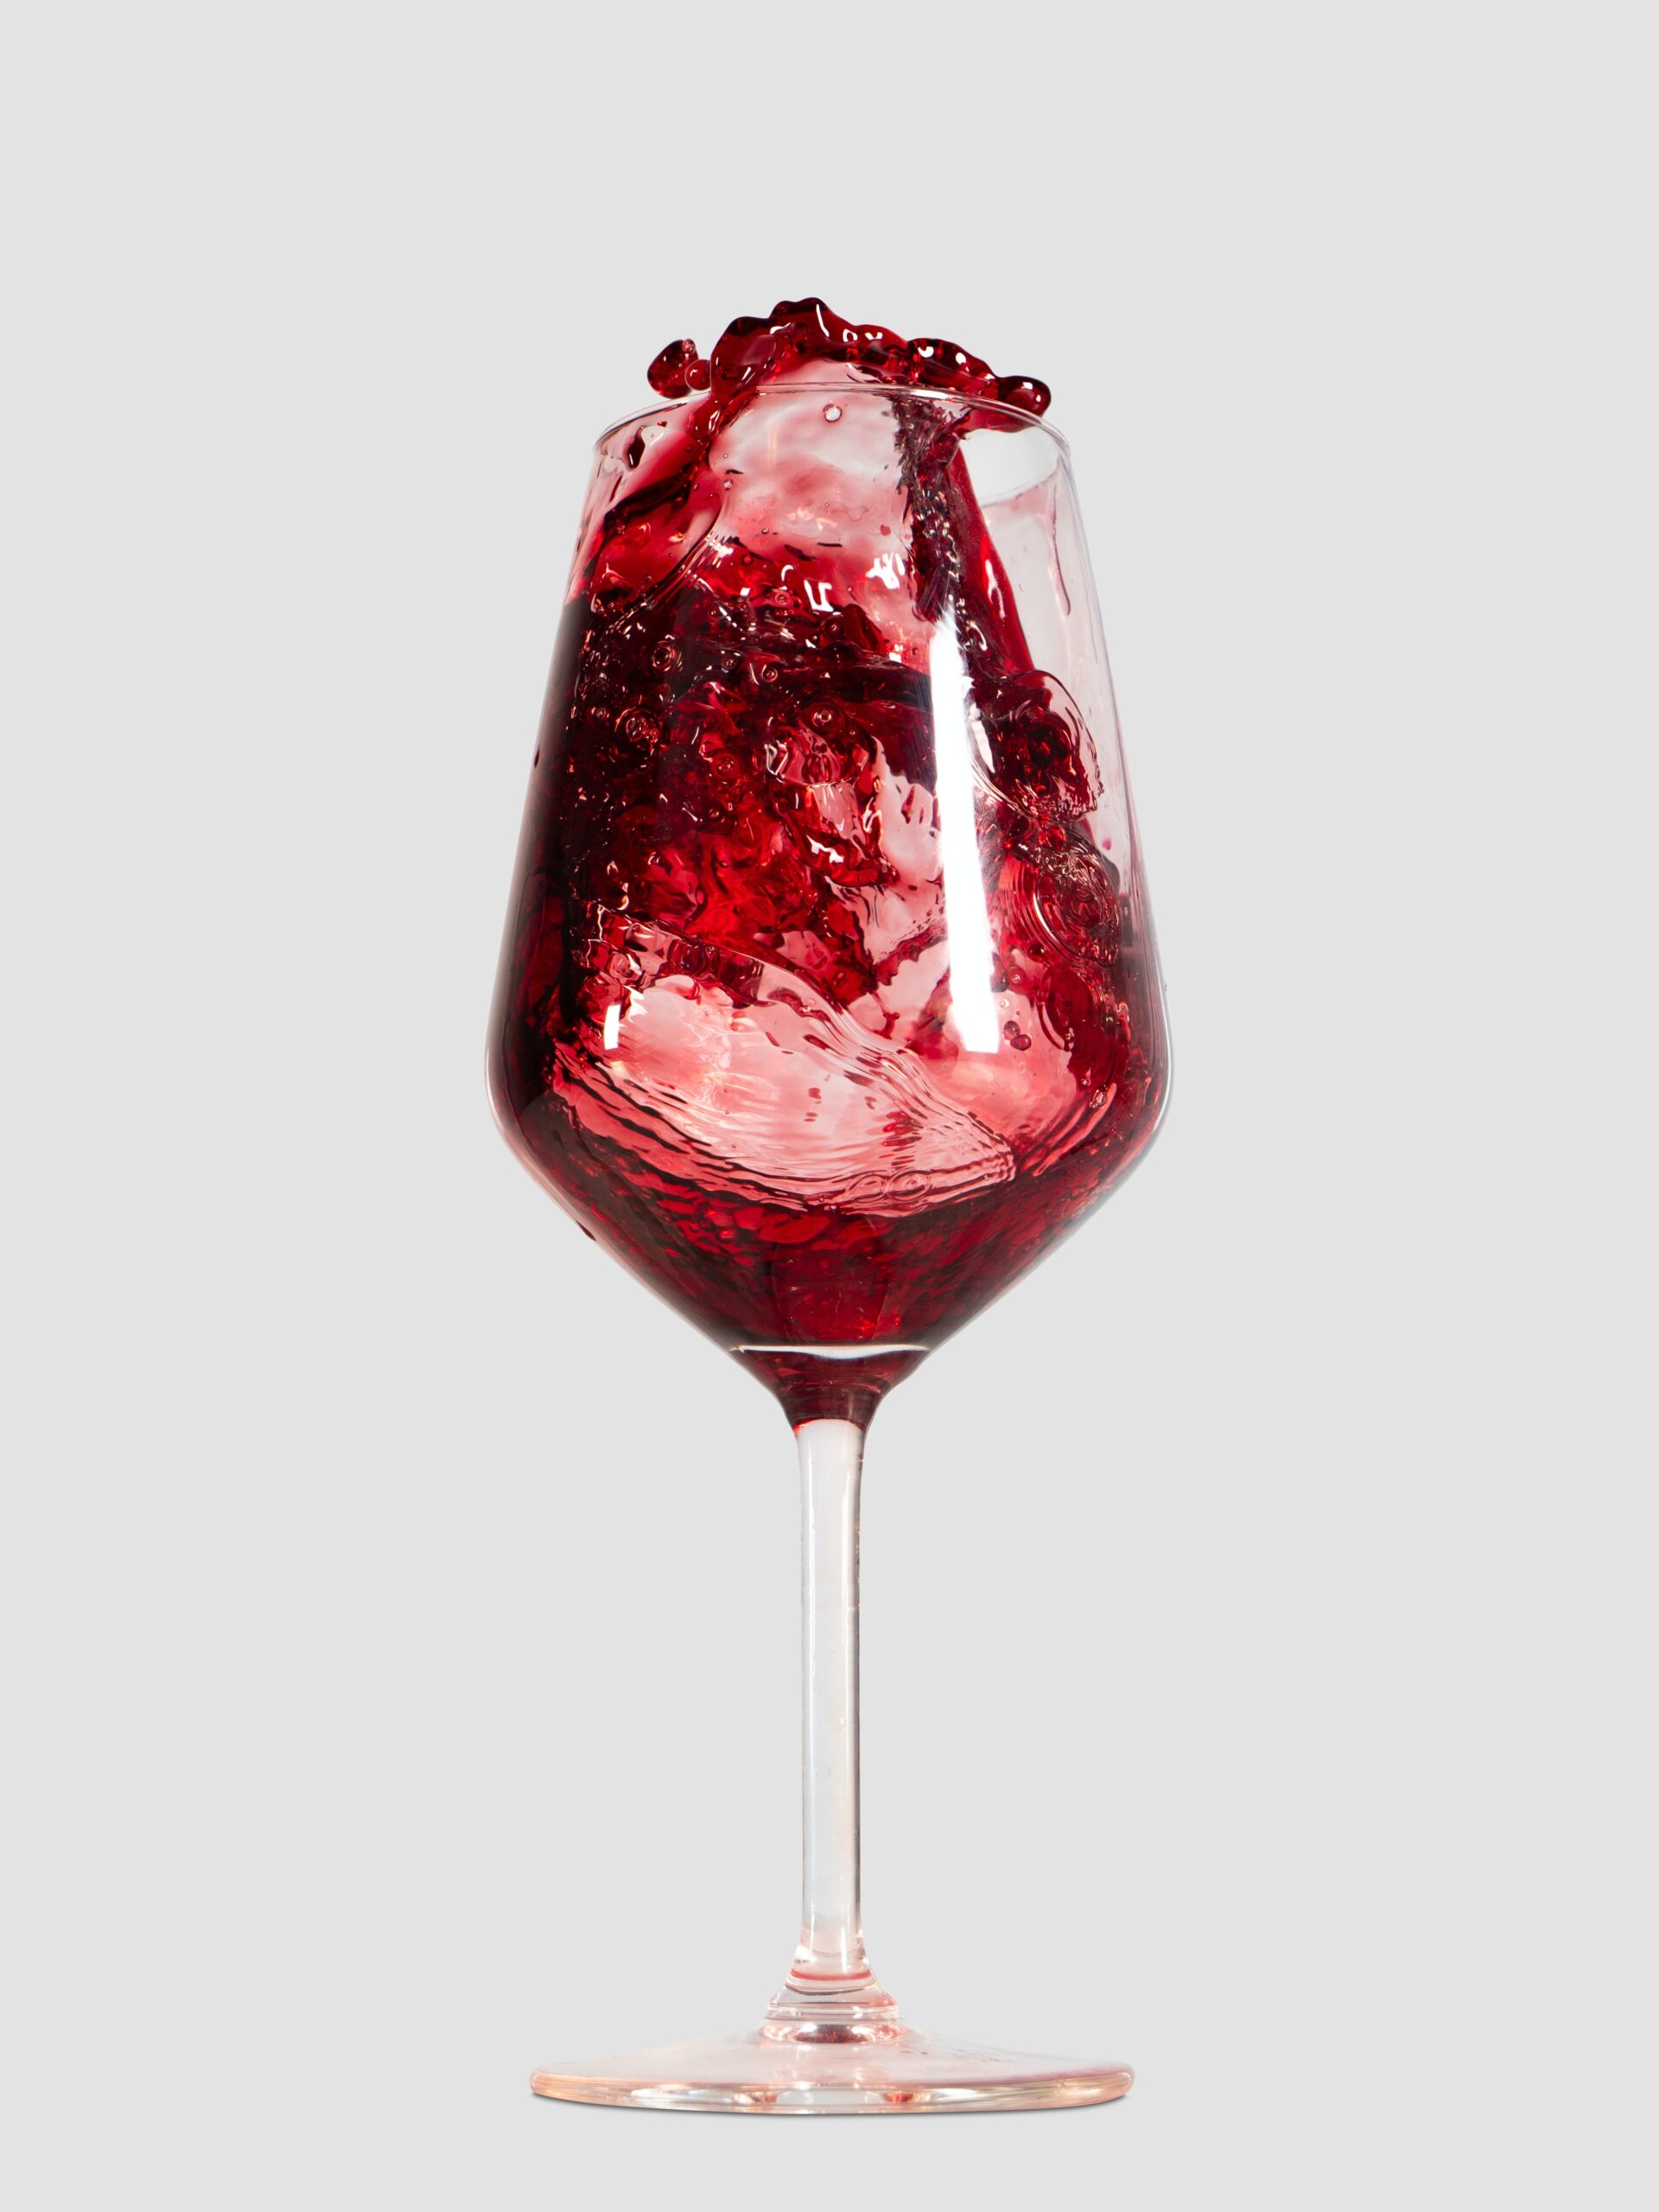 Could Red Wine Be The Anti-Aging Skin Care You Need?